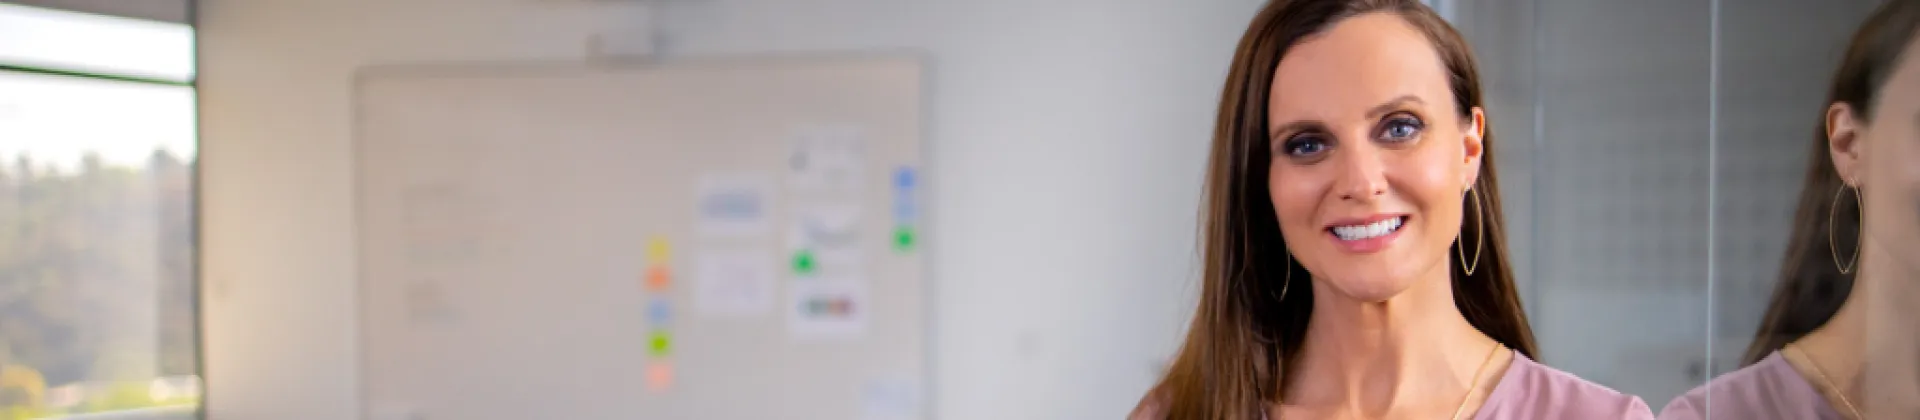 person in office with whiteboard in the background